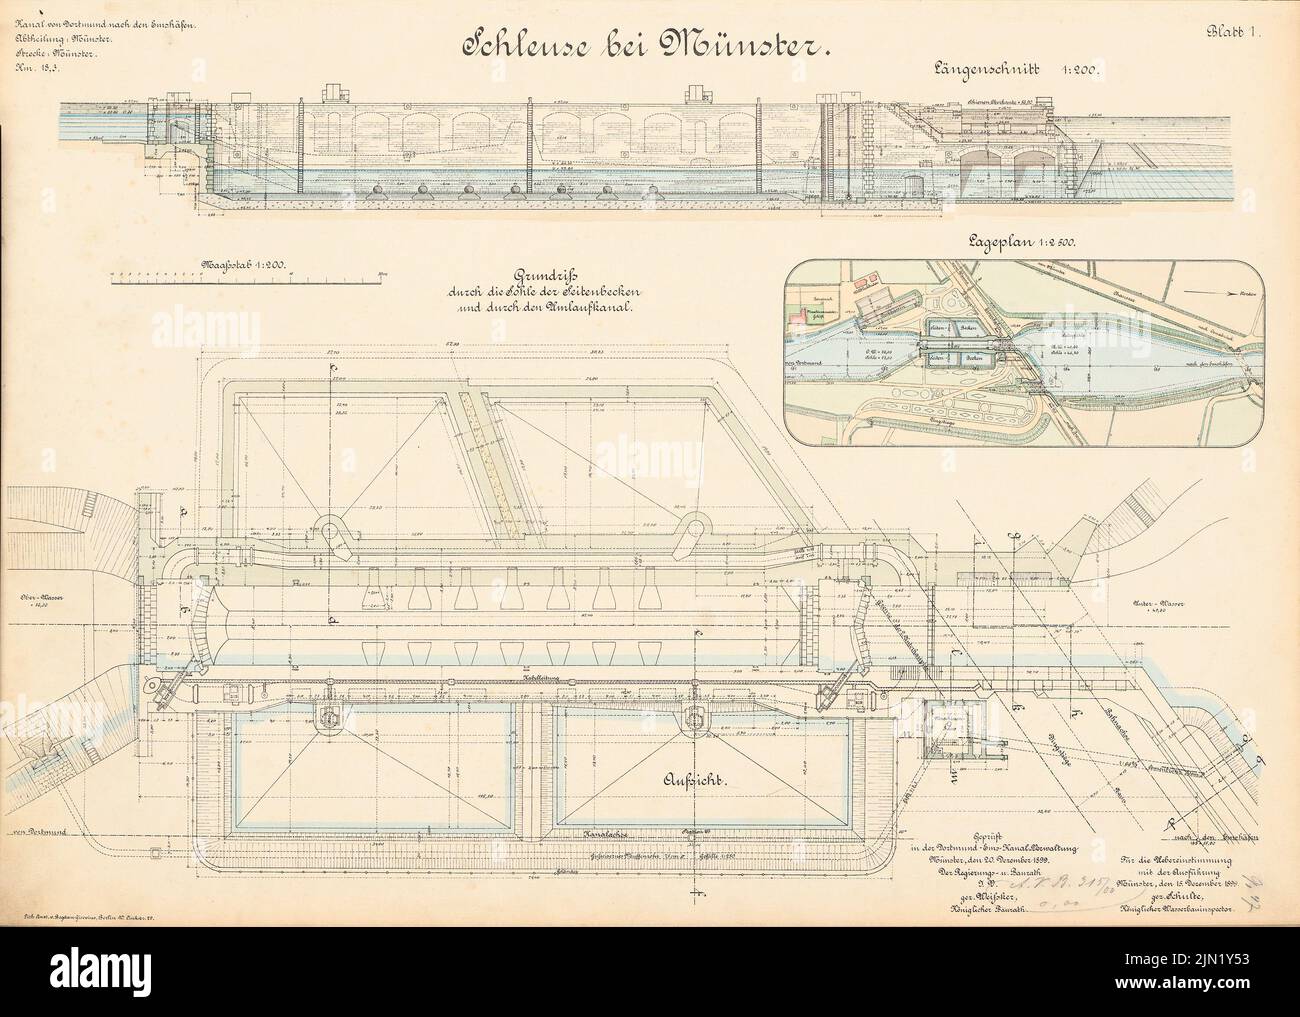 N.N., Dortmund-Ems-Canal. Schleuse, Münster: site plan 1: 2500, supervision, floor plan, cut 1: 200. Lithograph colored on paper, 50.1 x 70.3 cm (including scan edges) N.N. : Dortmund-Ems-Kanal. Schleuse, Münster Stock Photo